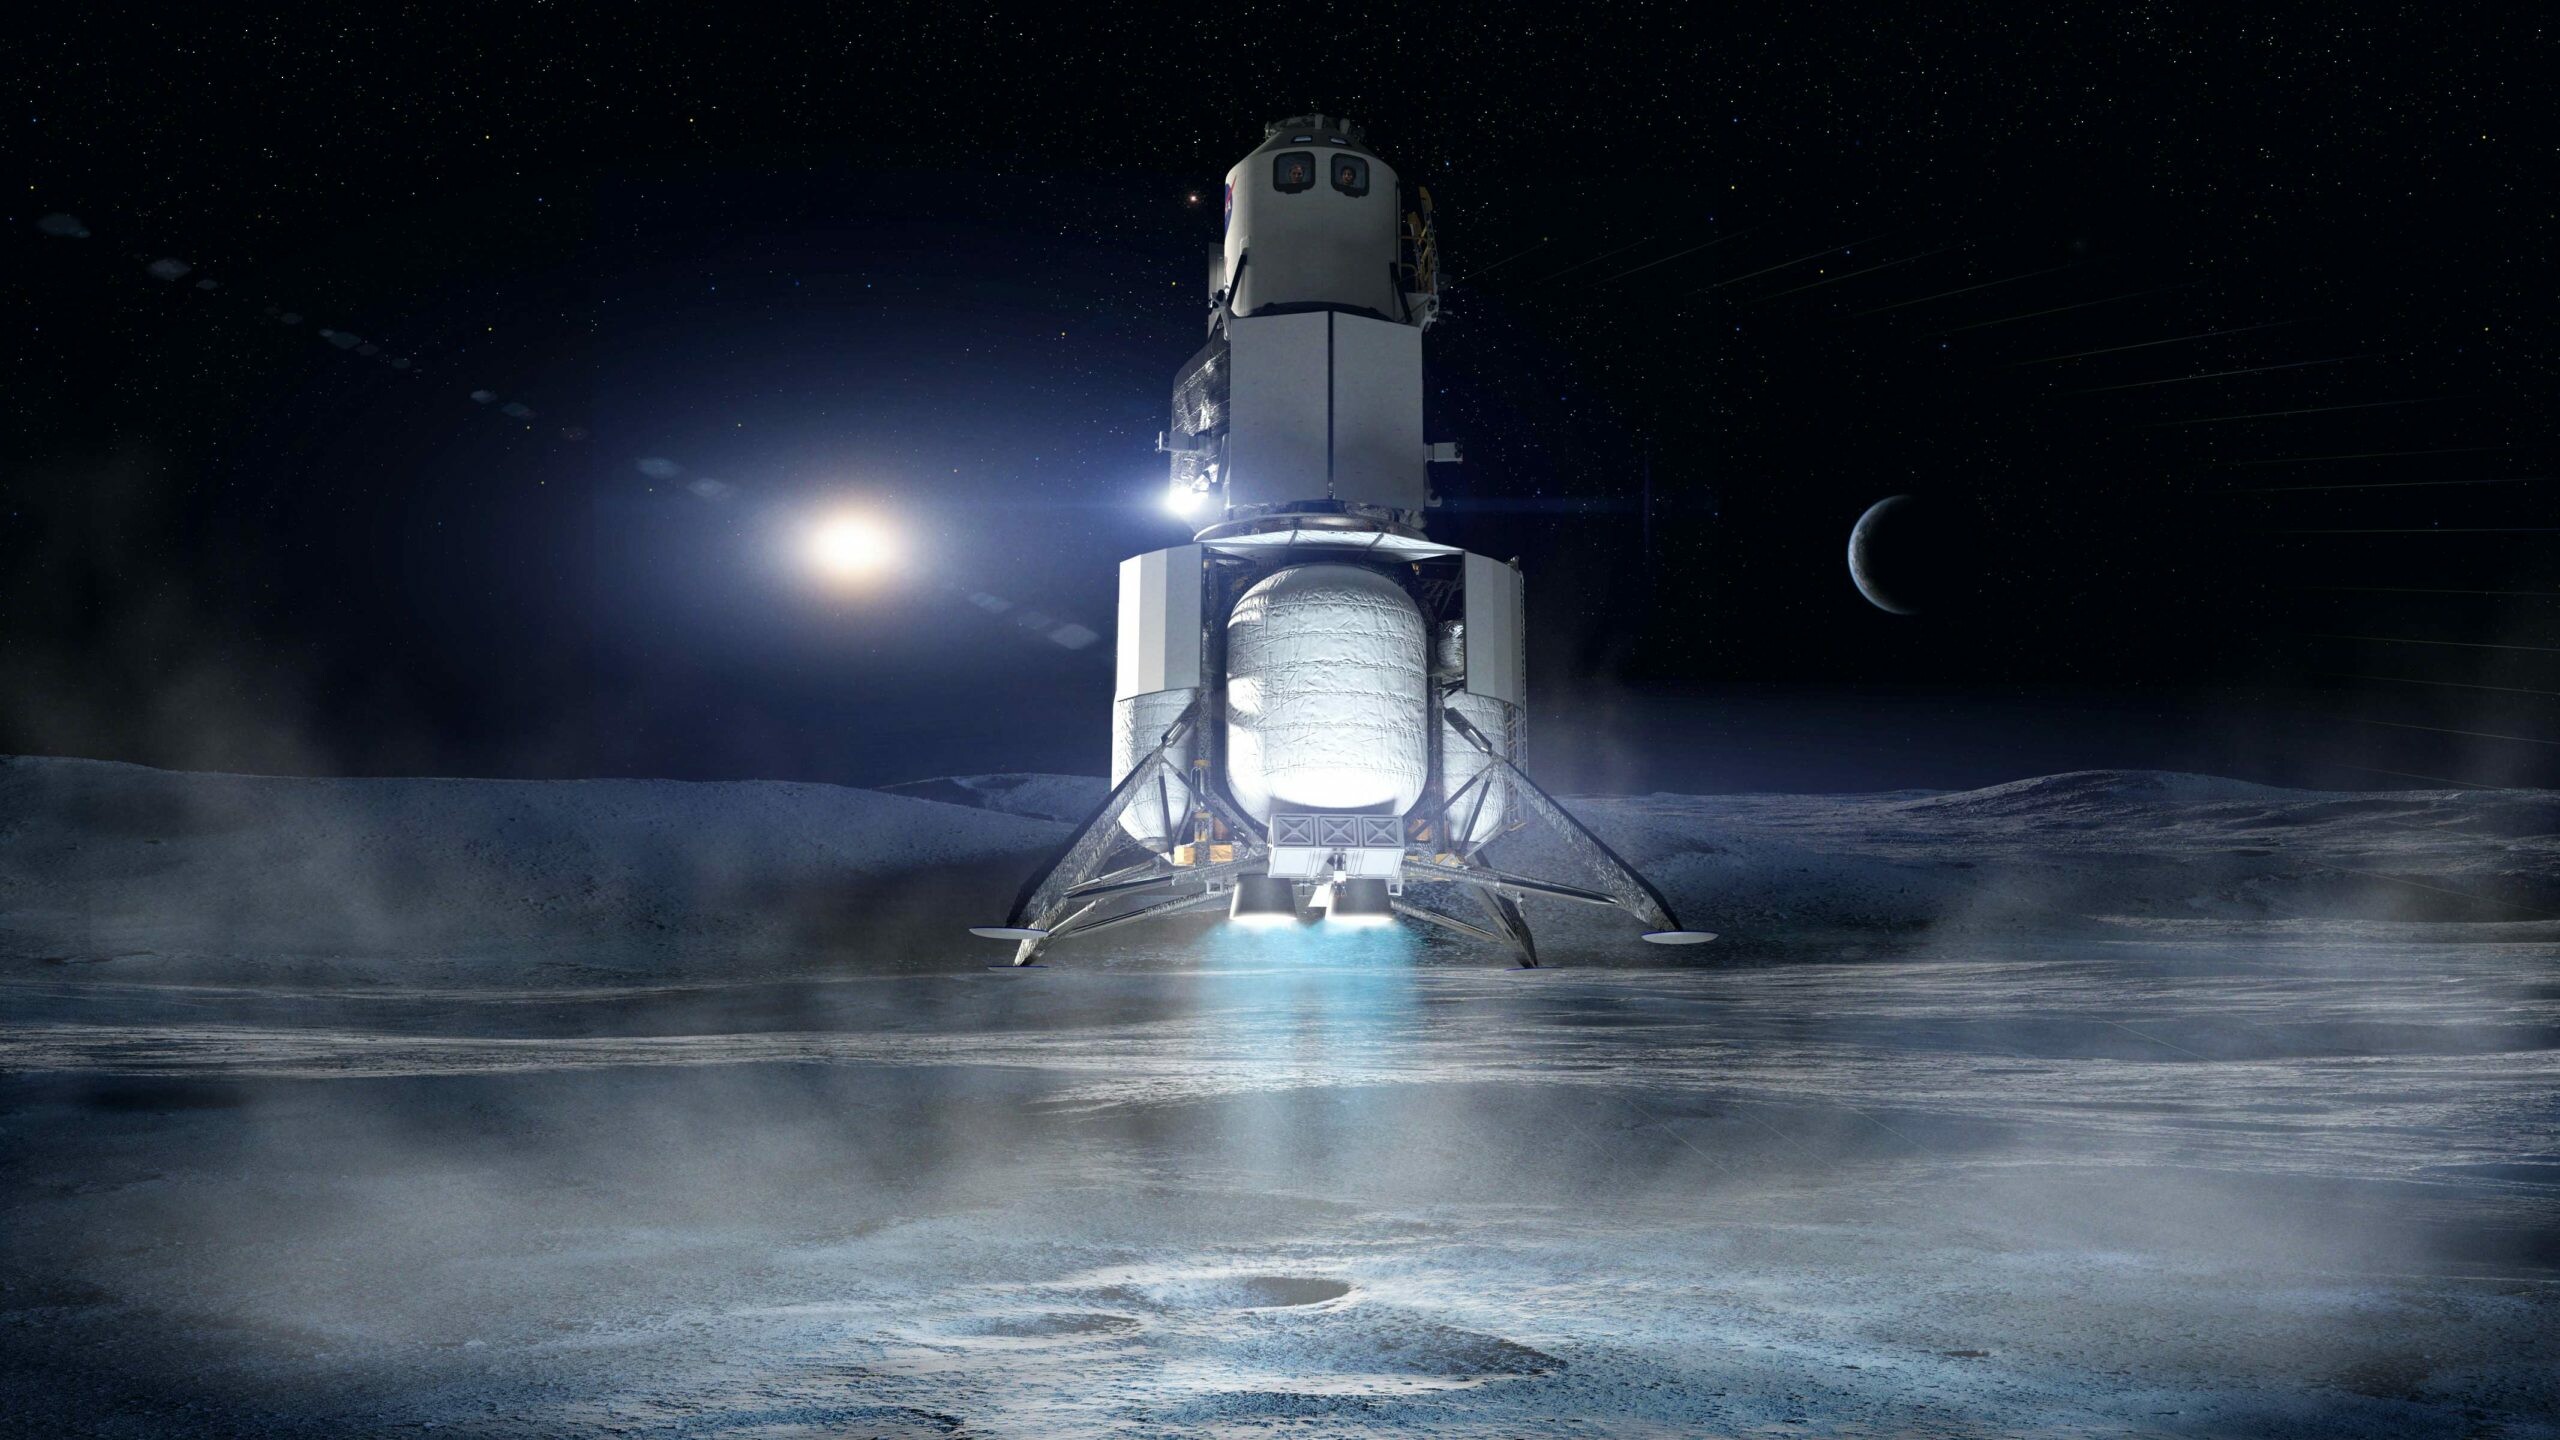 Blue Origin: Blue Moon, A flexible lander delivering a wide variety of small, medium, and large payloads to the lunar surface. 2560x1440 HD Wallpaper.